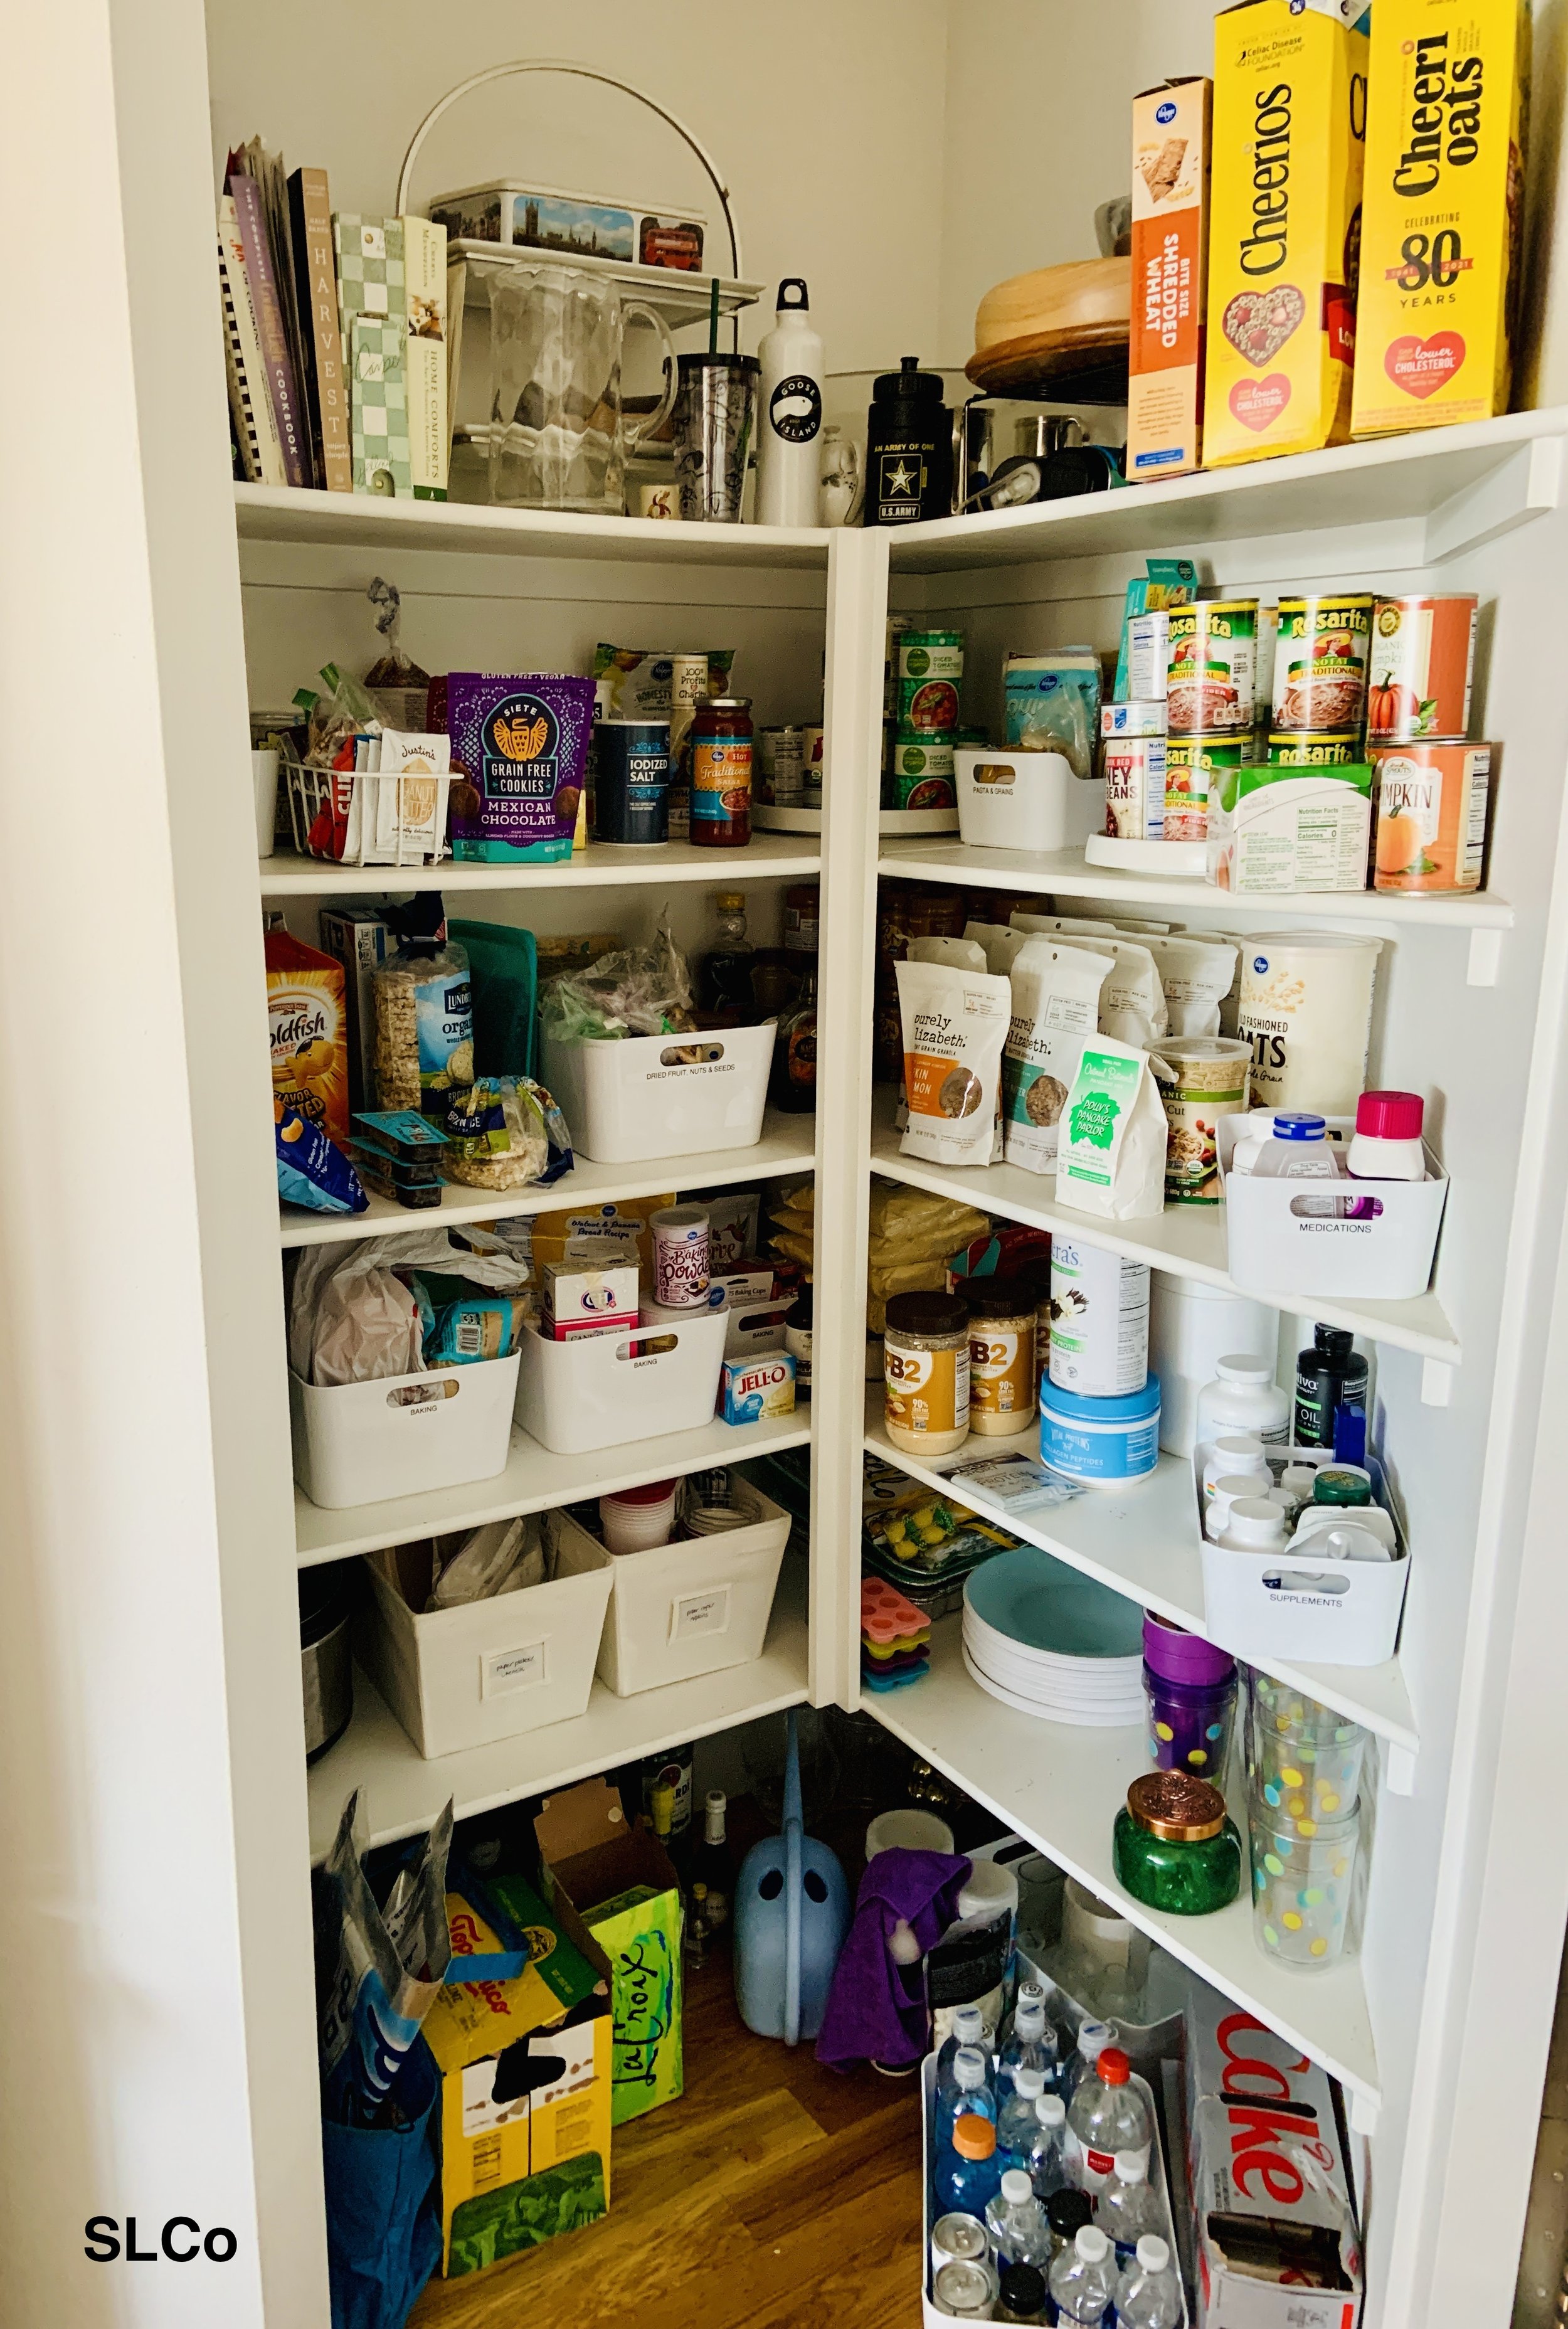 Larger image of kitchen pantry with white containers and items organized together.